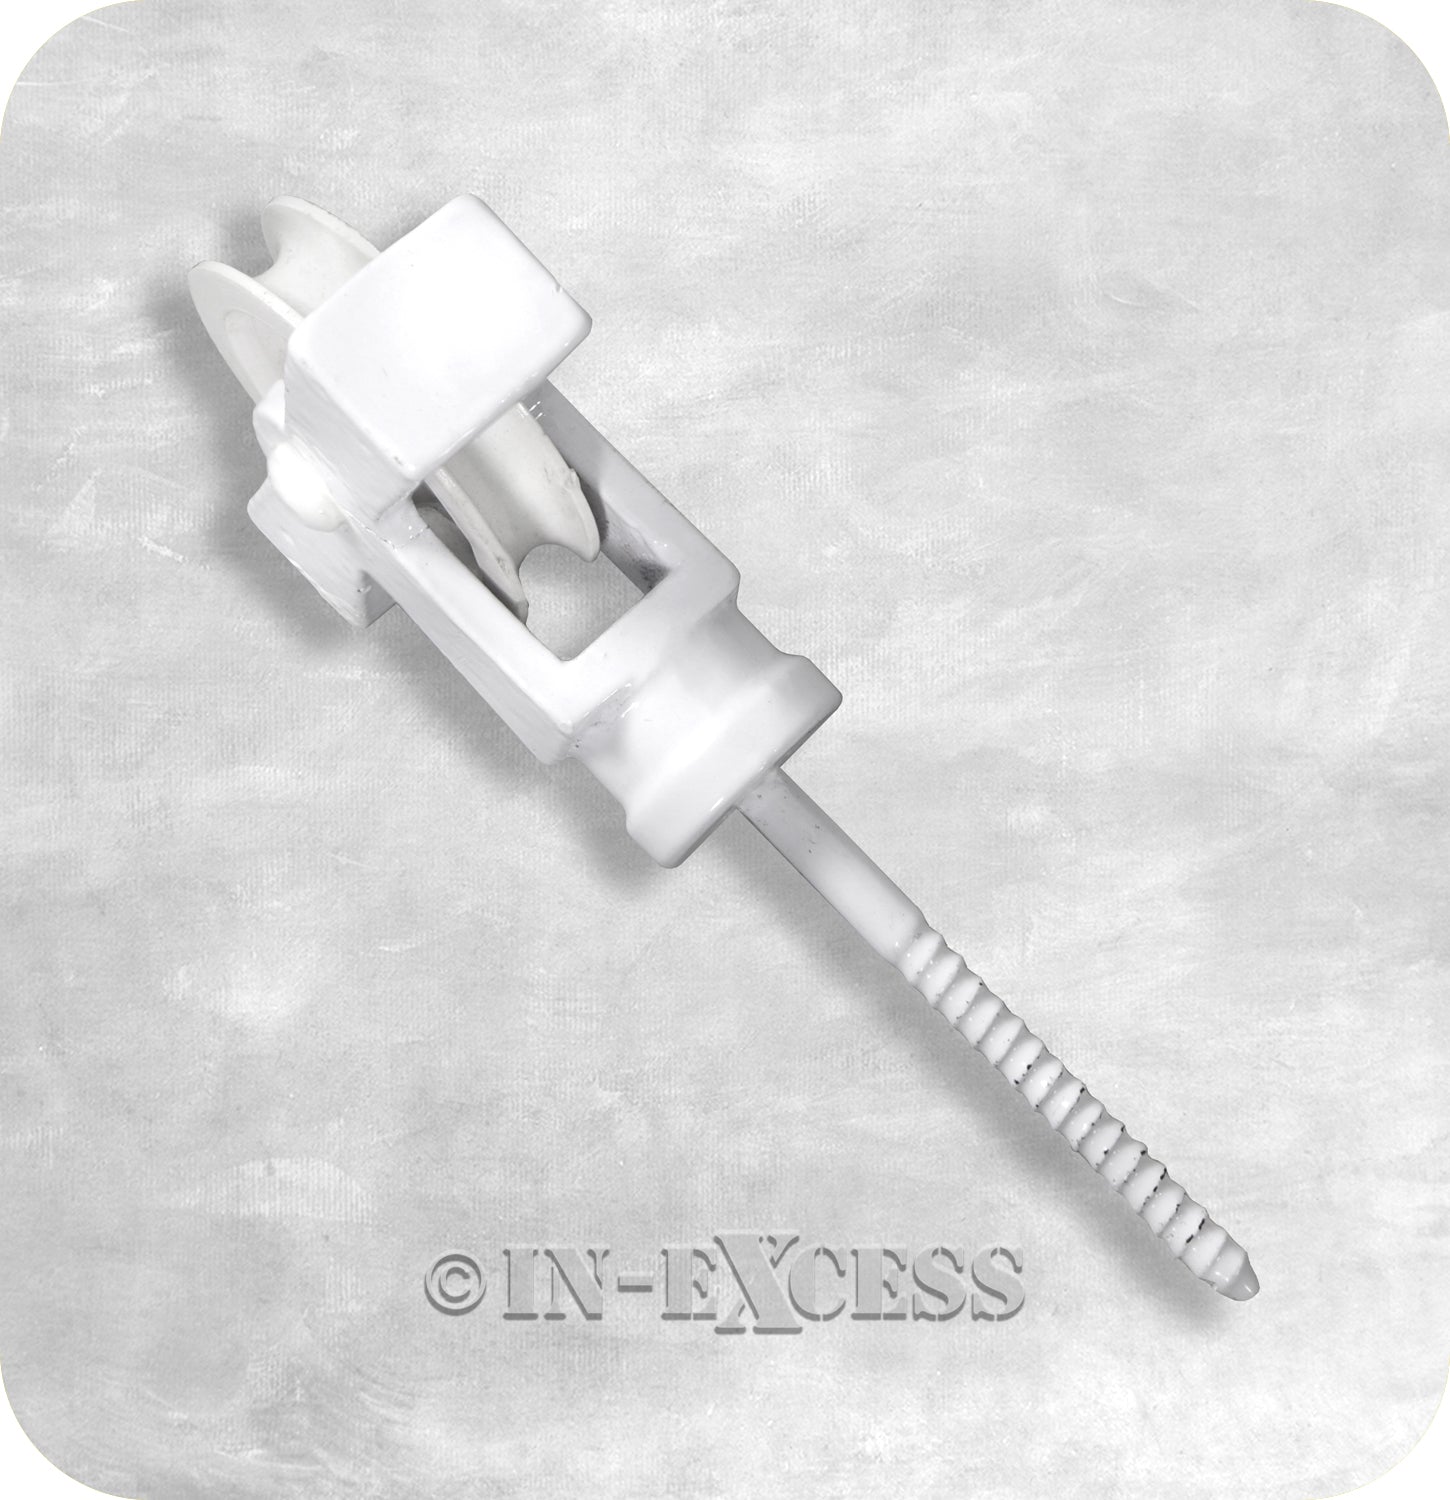 In-Excess Hardware White Coated Cast Screw Laundry Pulley - 44mm Single Pulley